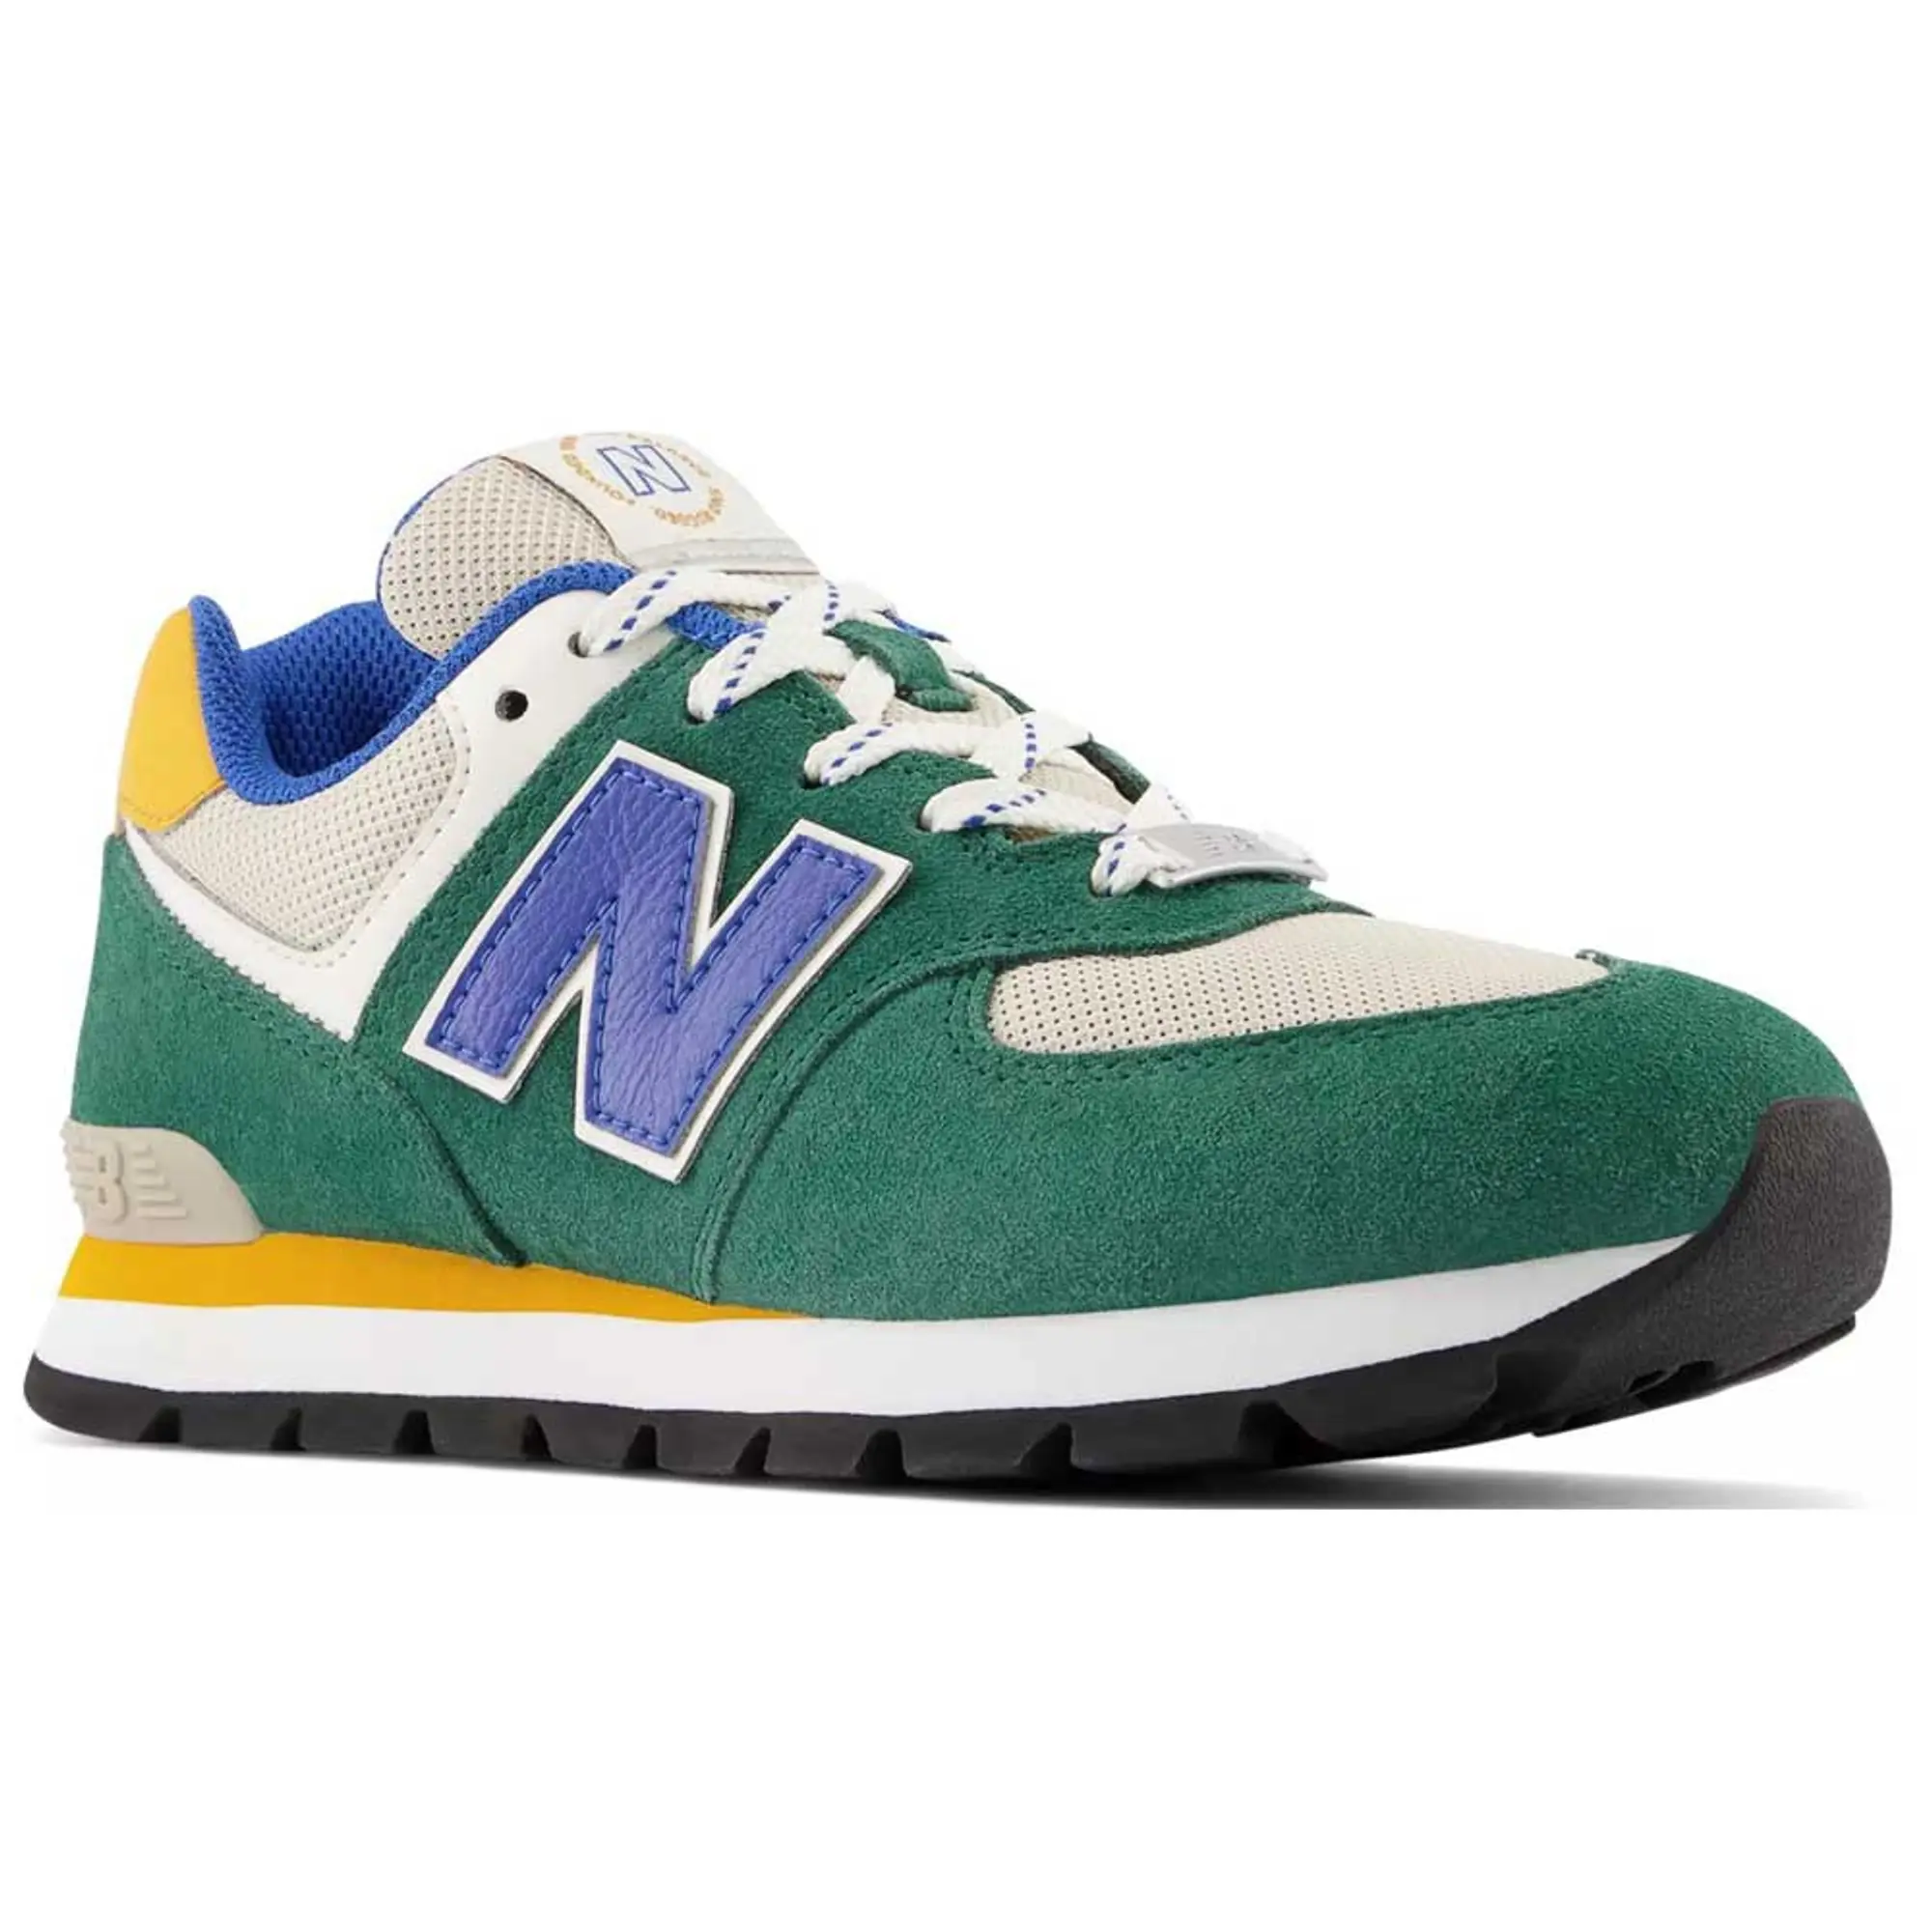 New Balance 574 Gs Trainers  - Green